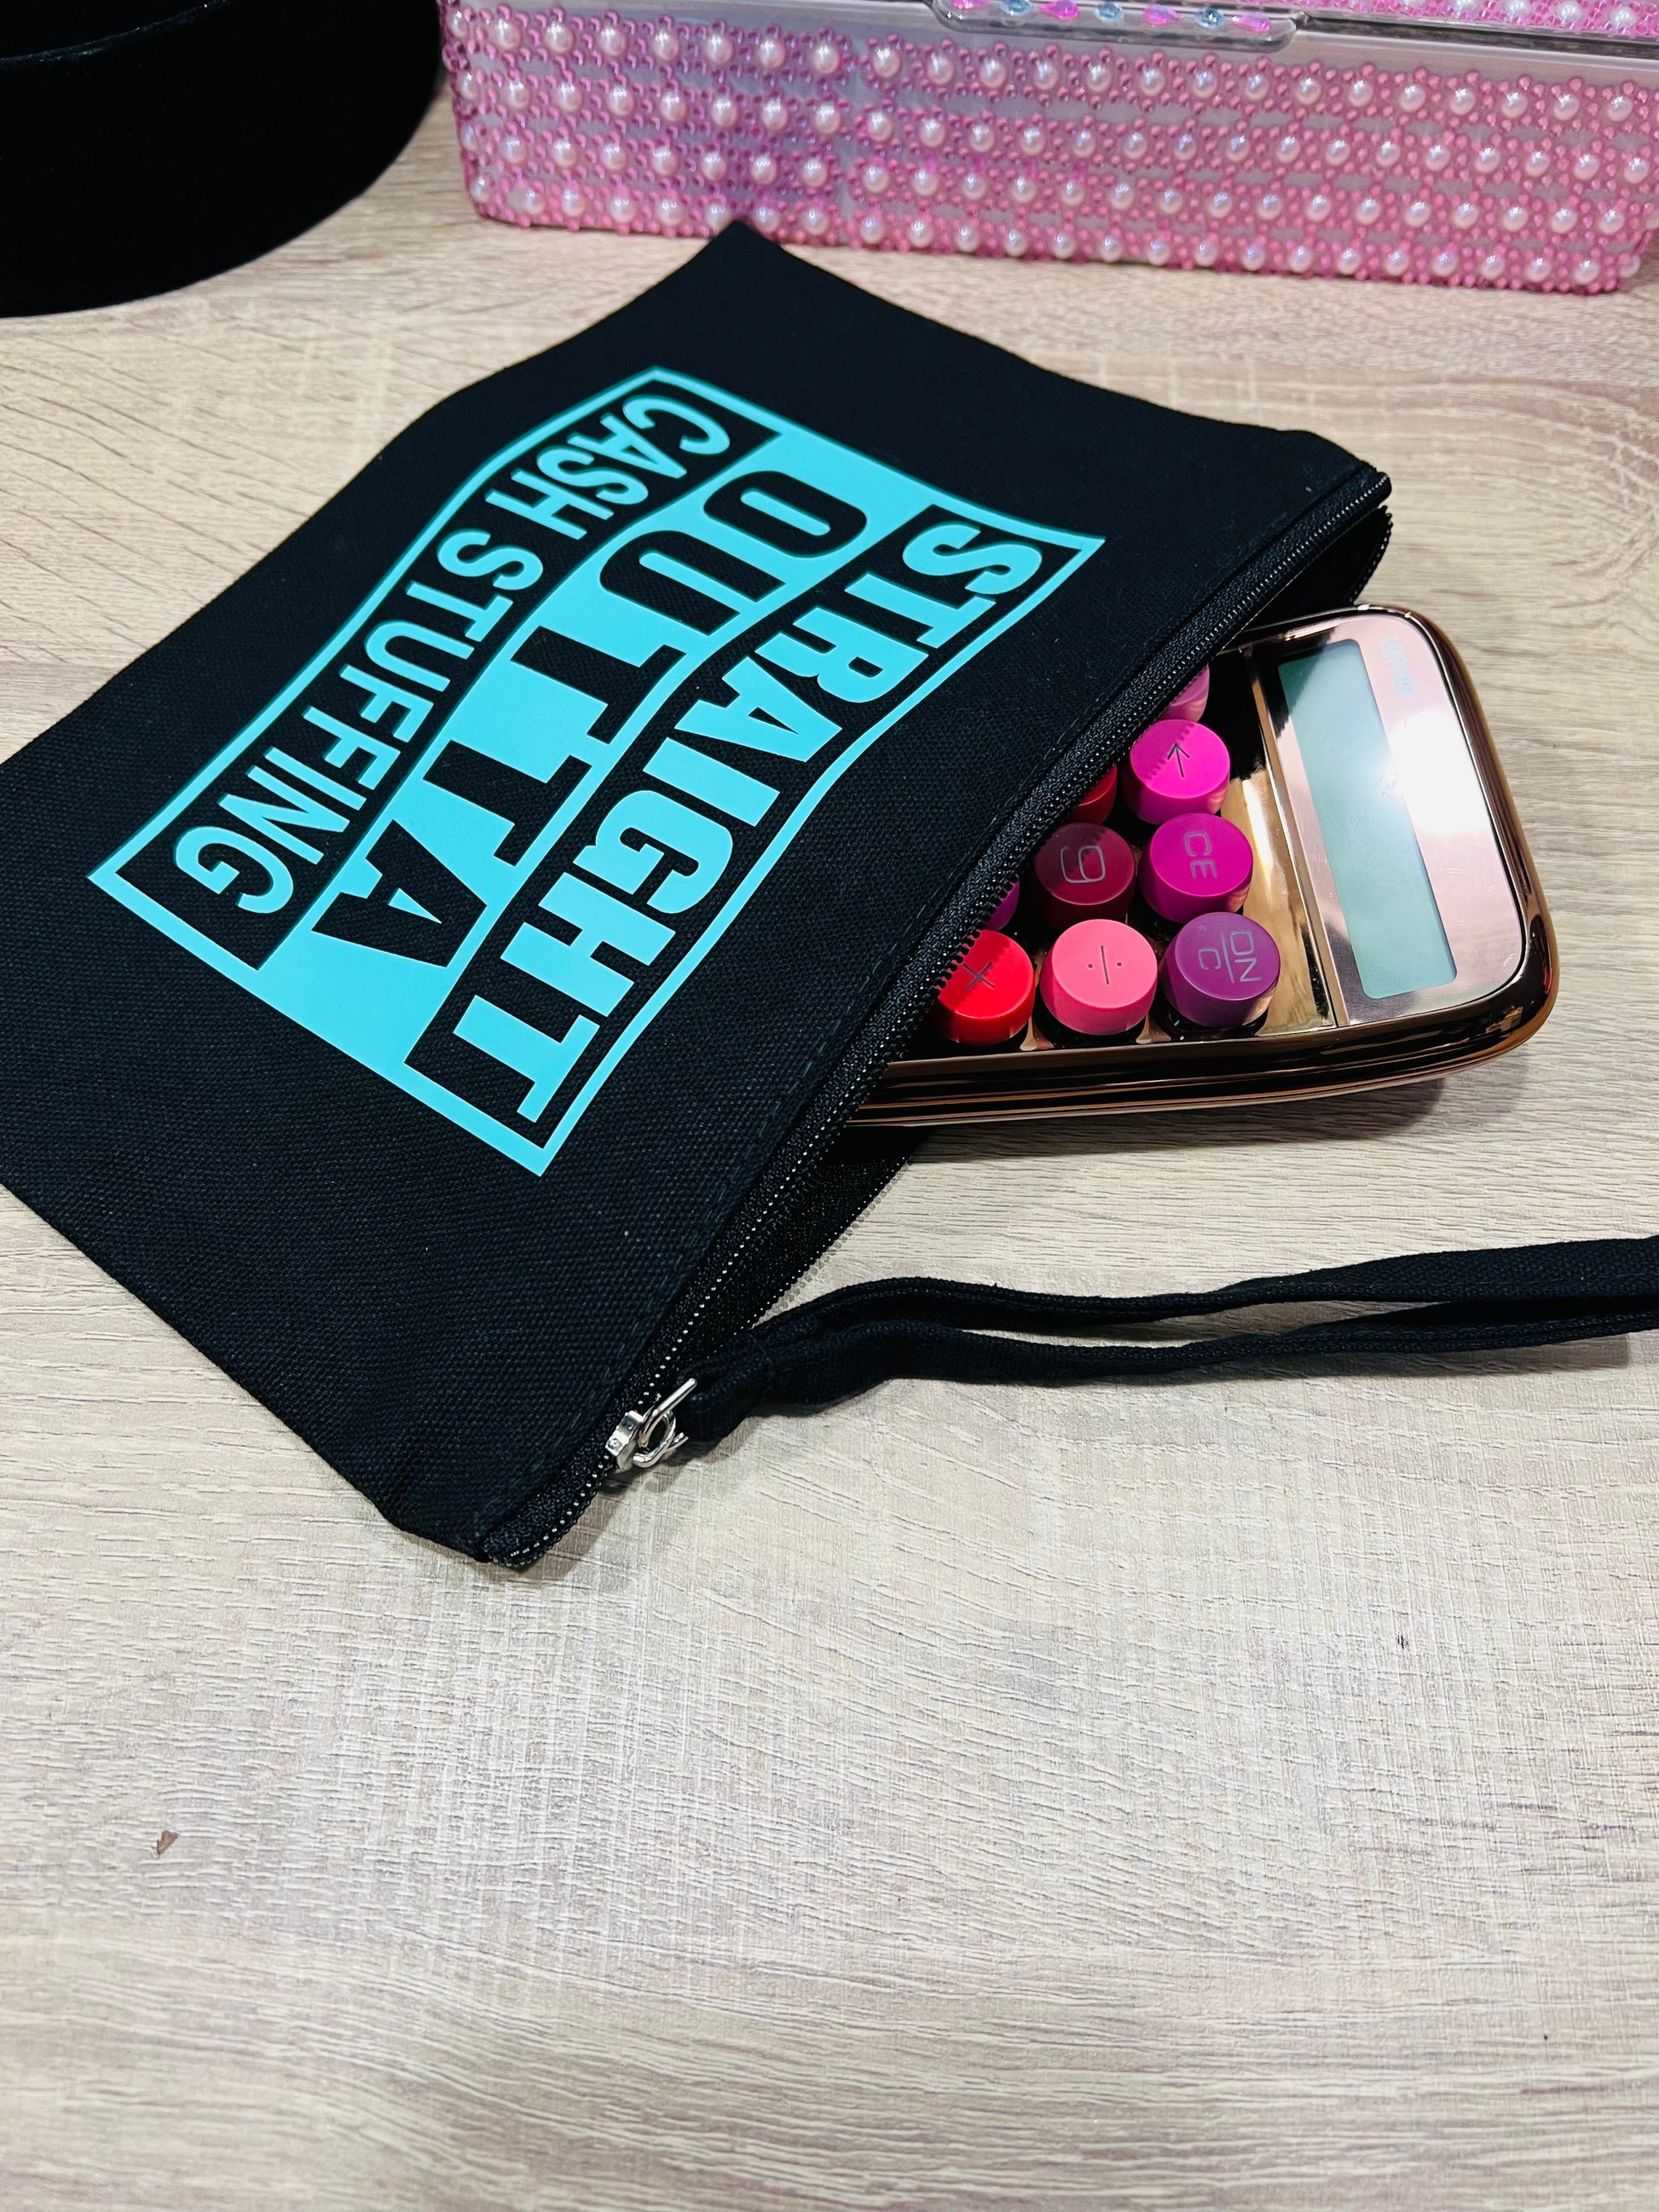 Teal Straight Outta Cash Stuffing Black Zipper Pouch